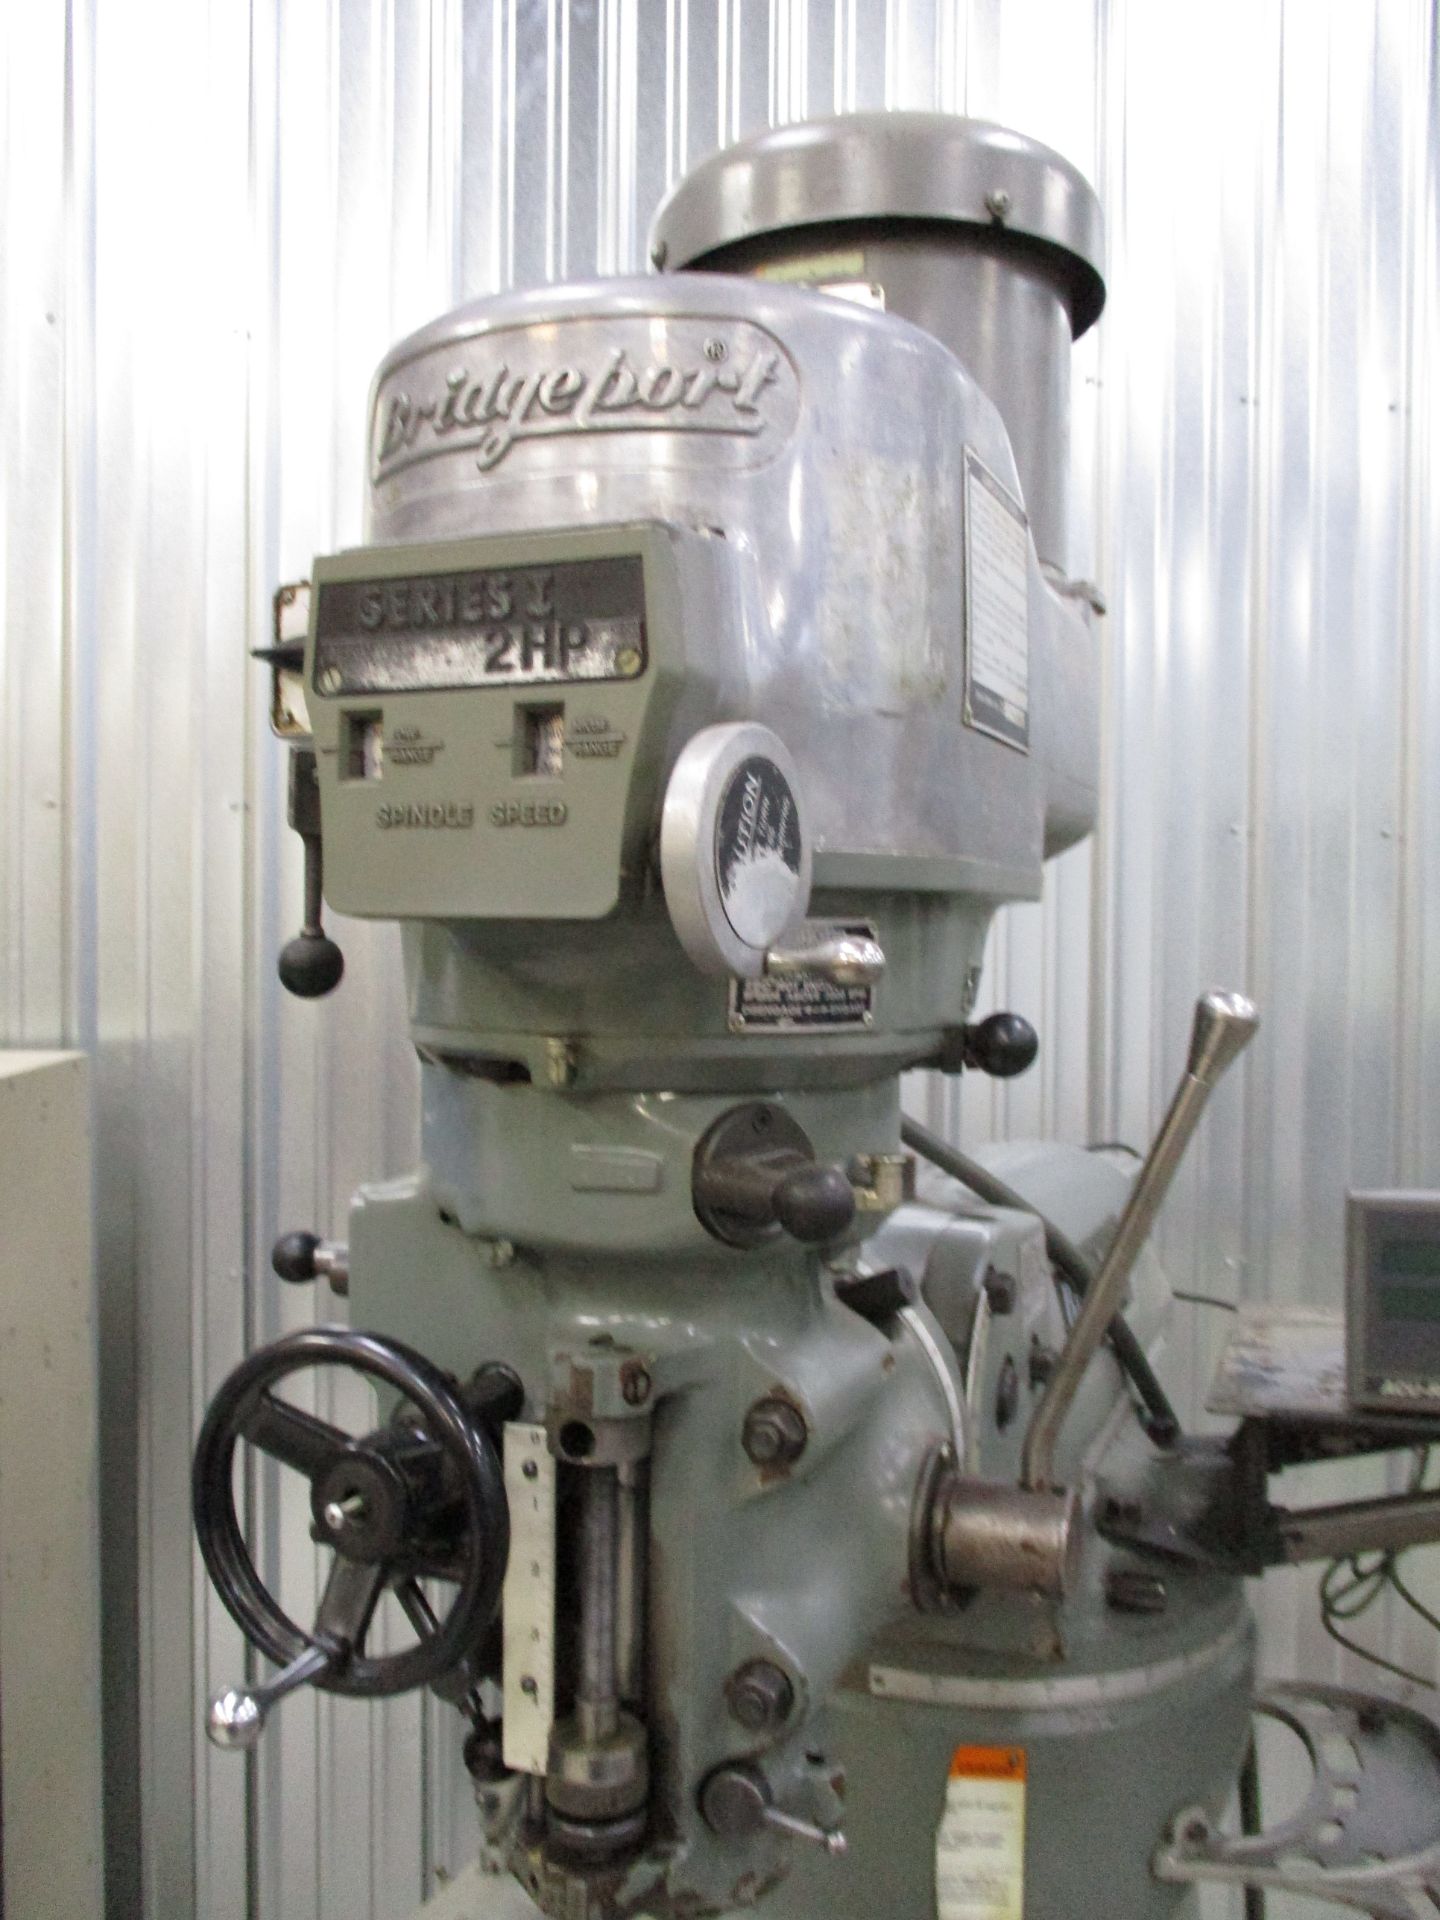 Bridgeport Series I, 2 HP Vertical Mill, s/n 12BR245602, 9” X 42” Table, Accurite D.R.O., Loading - Image 3 of 6